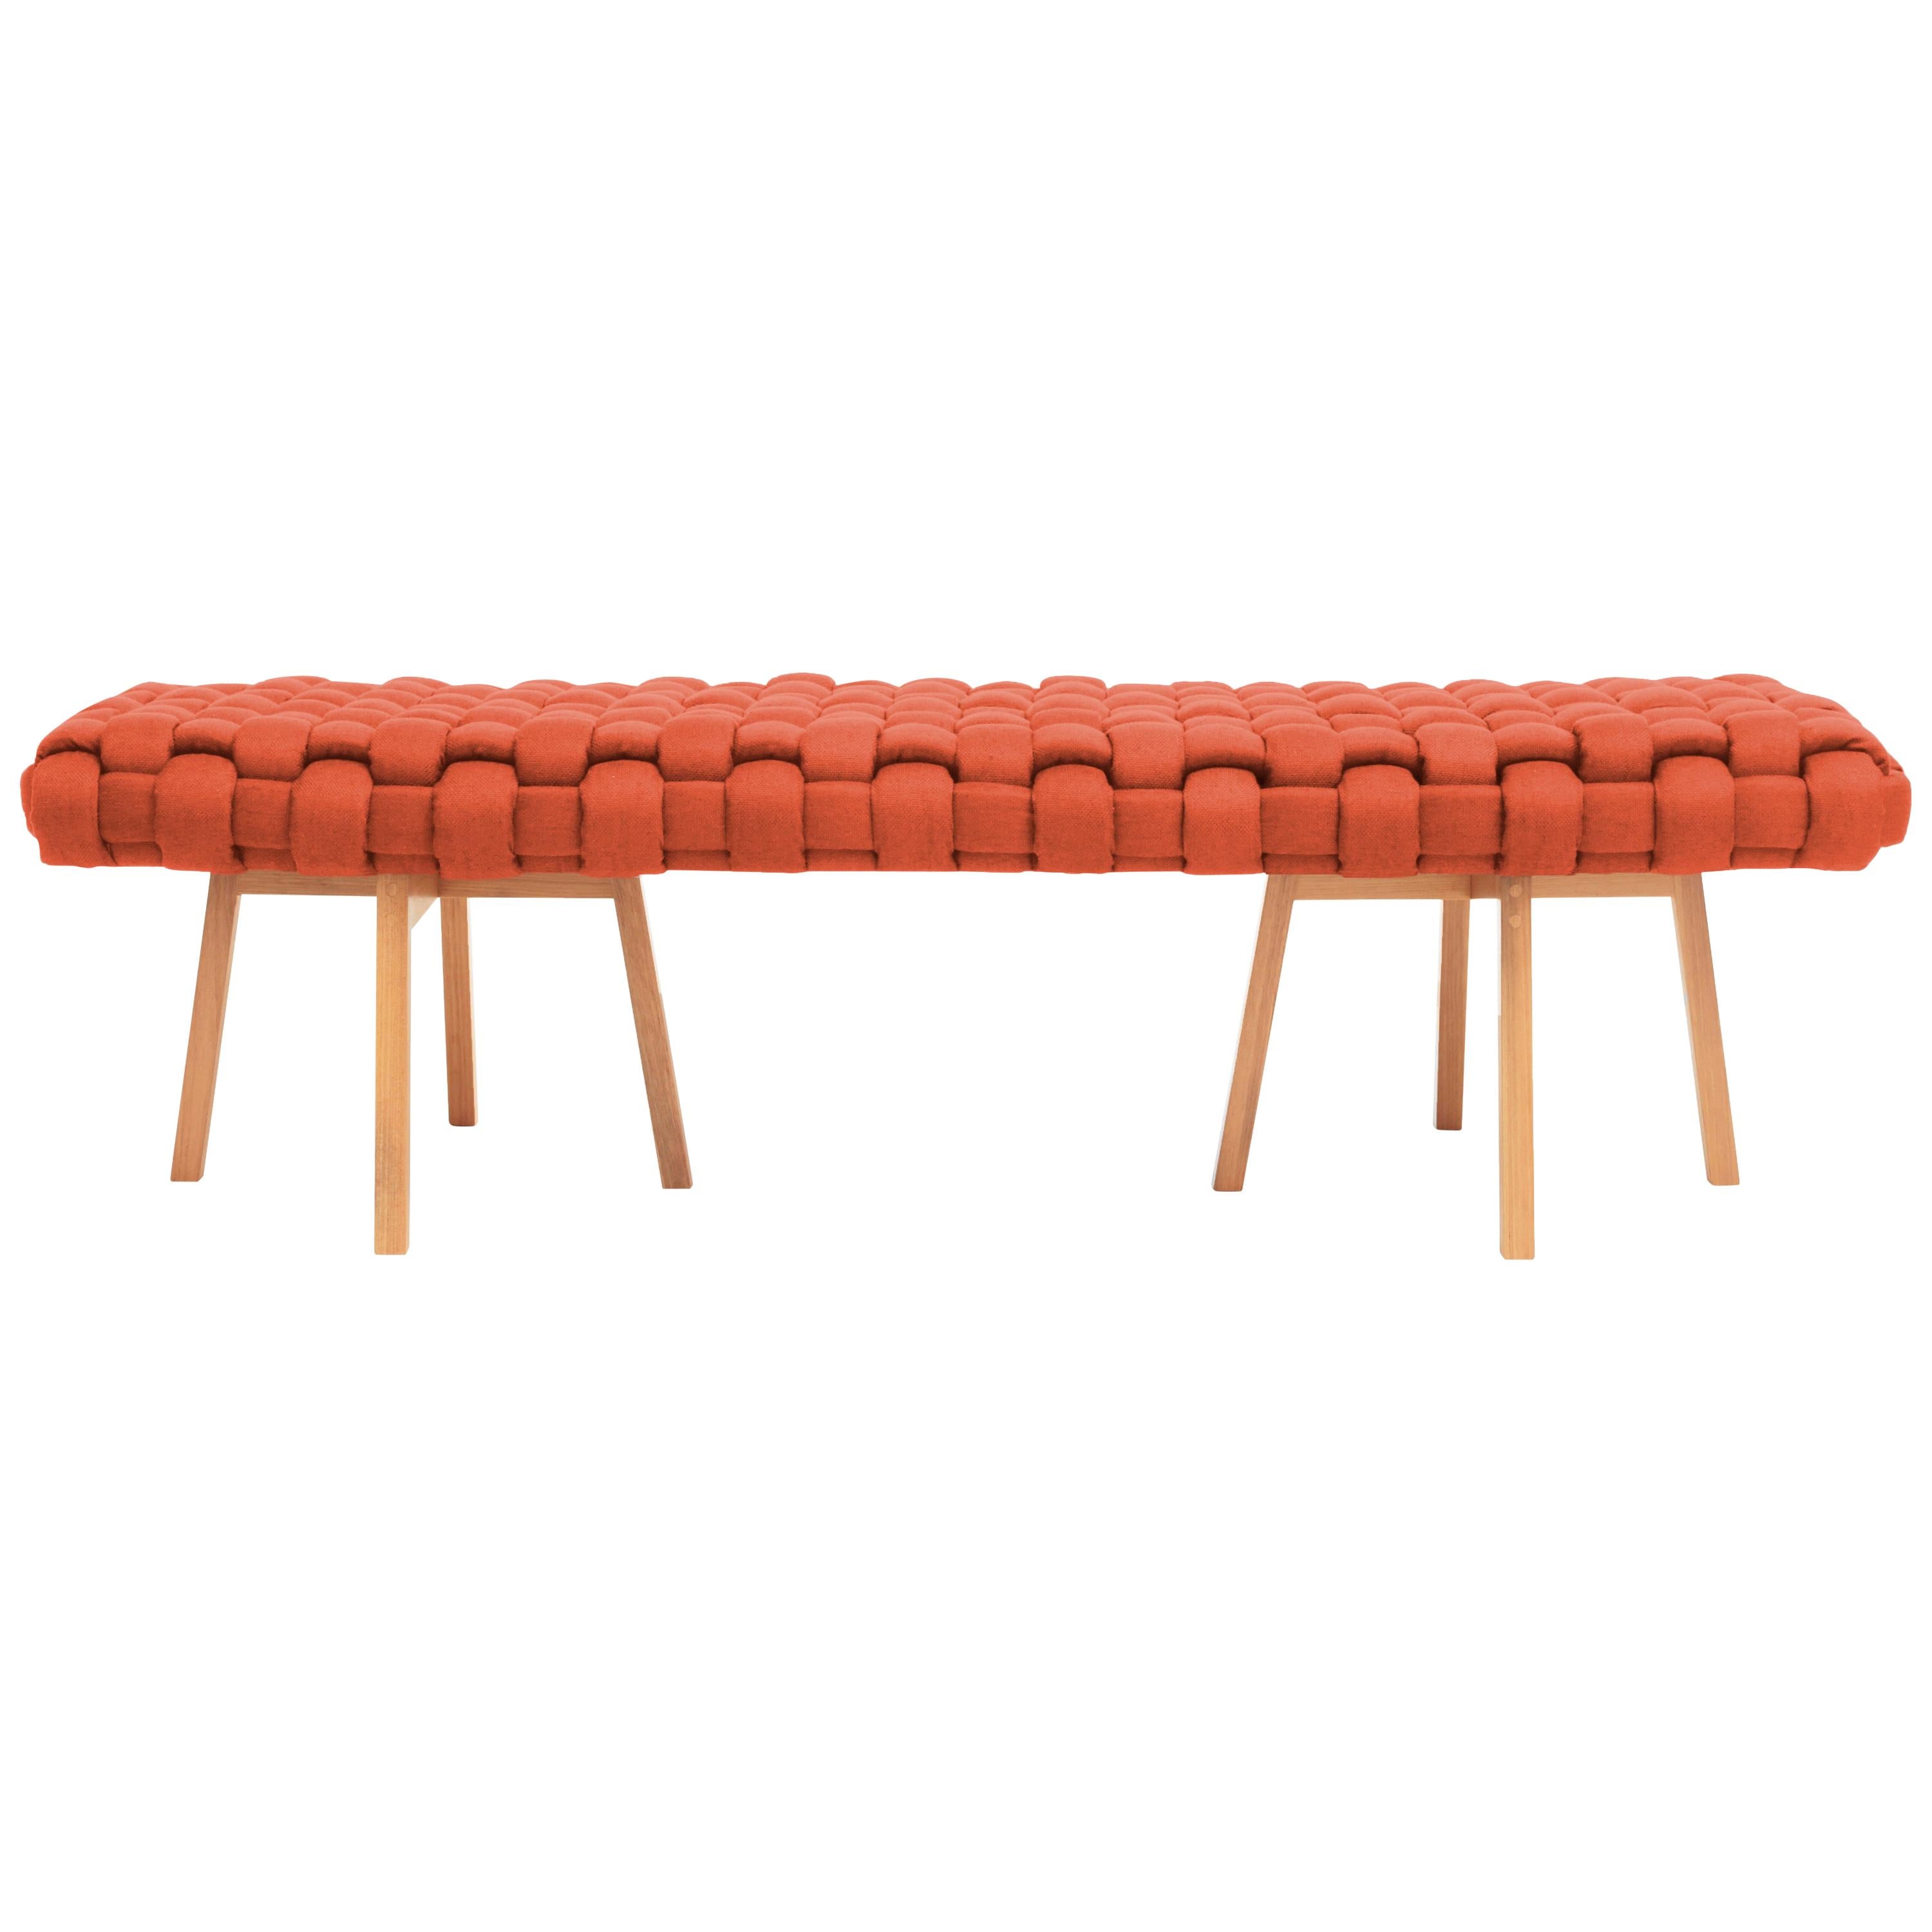 Contemporary Wood Bench, Handwoven Upholstery, the "Trama", Orange